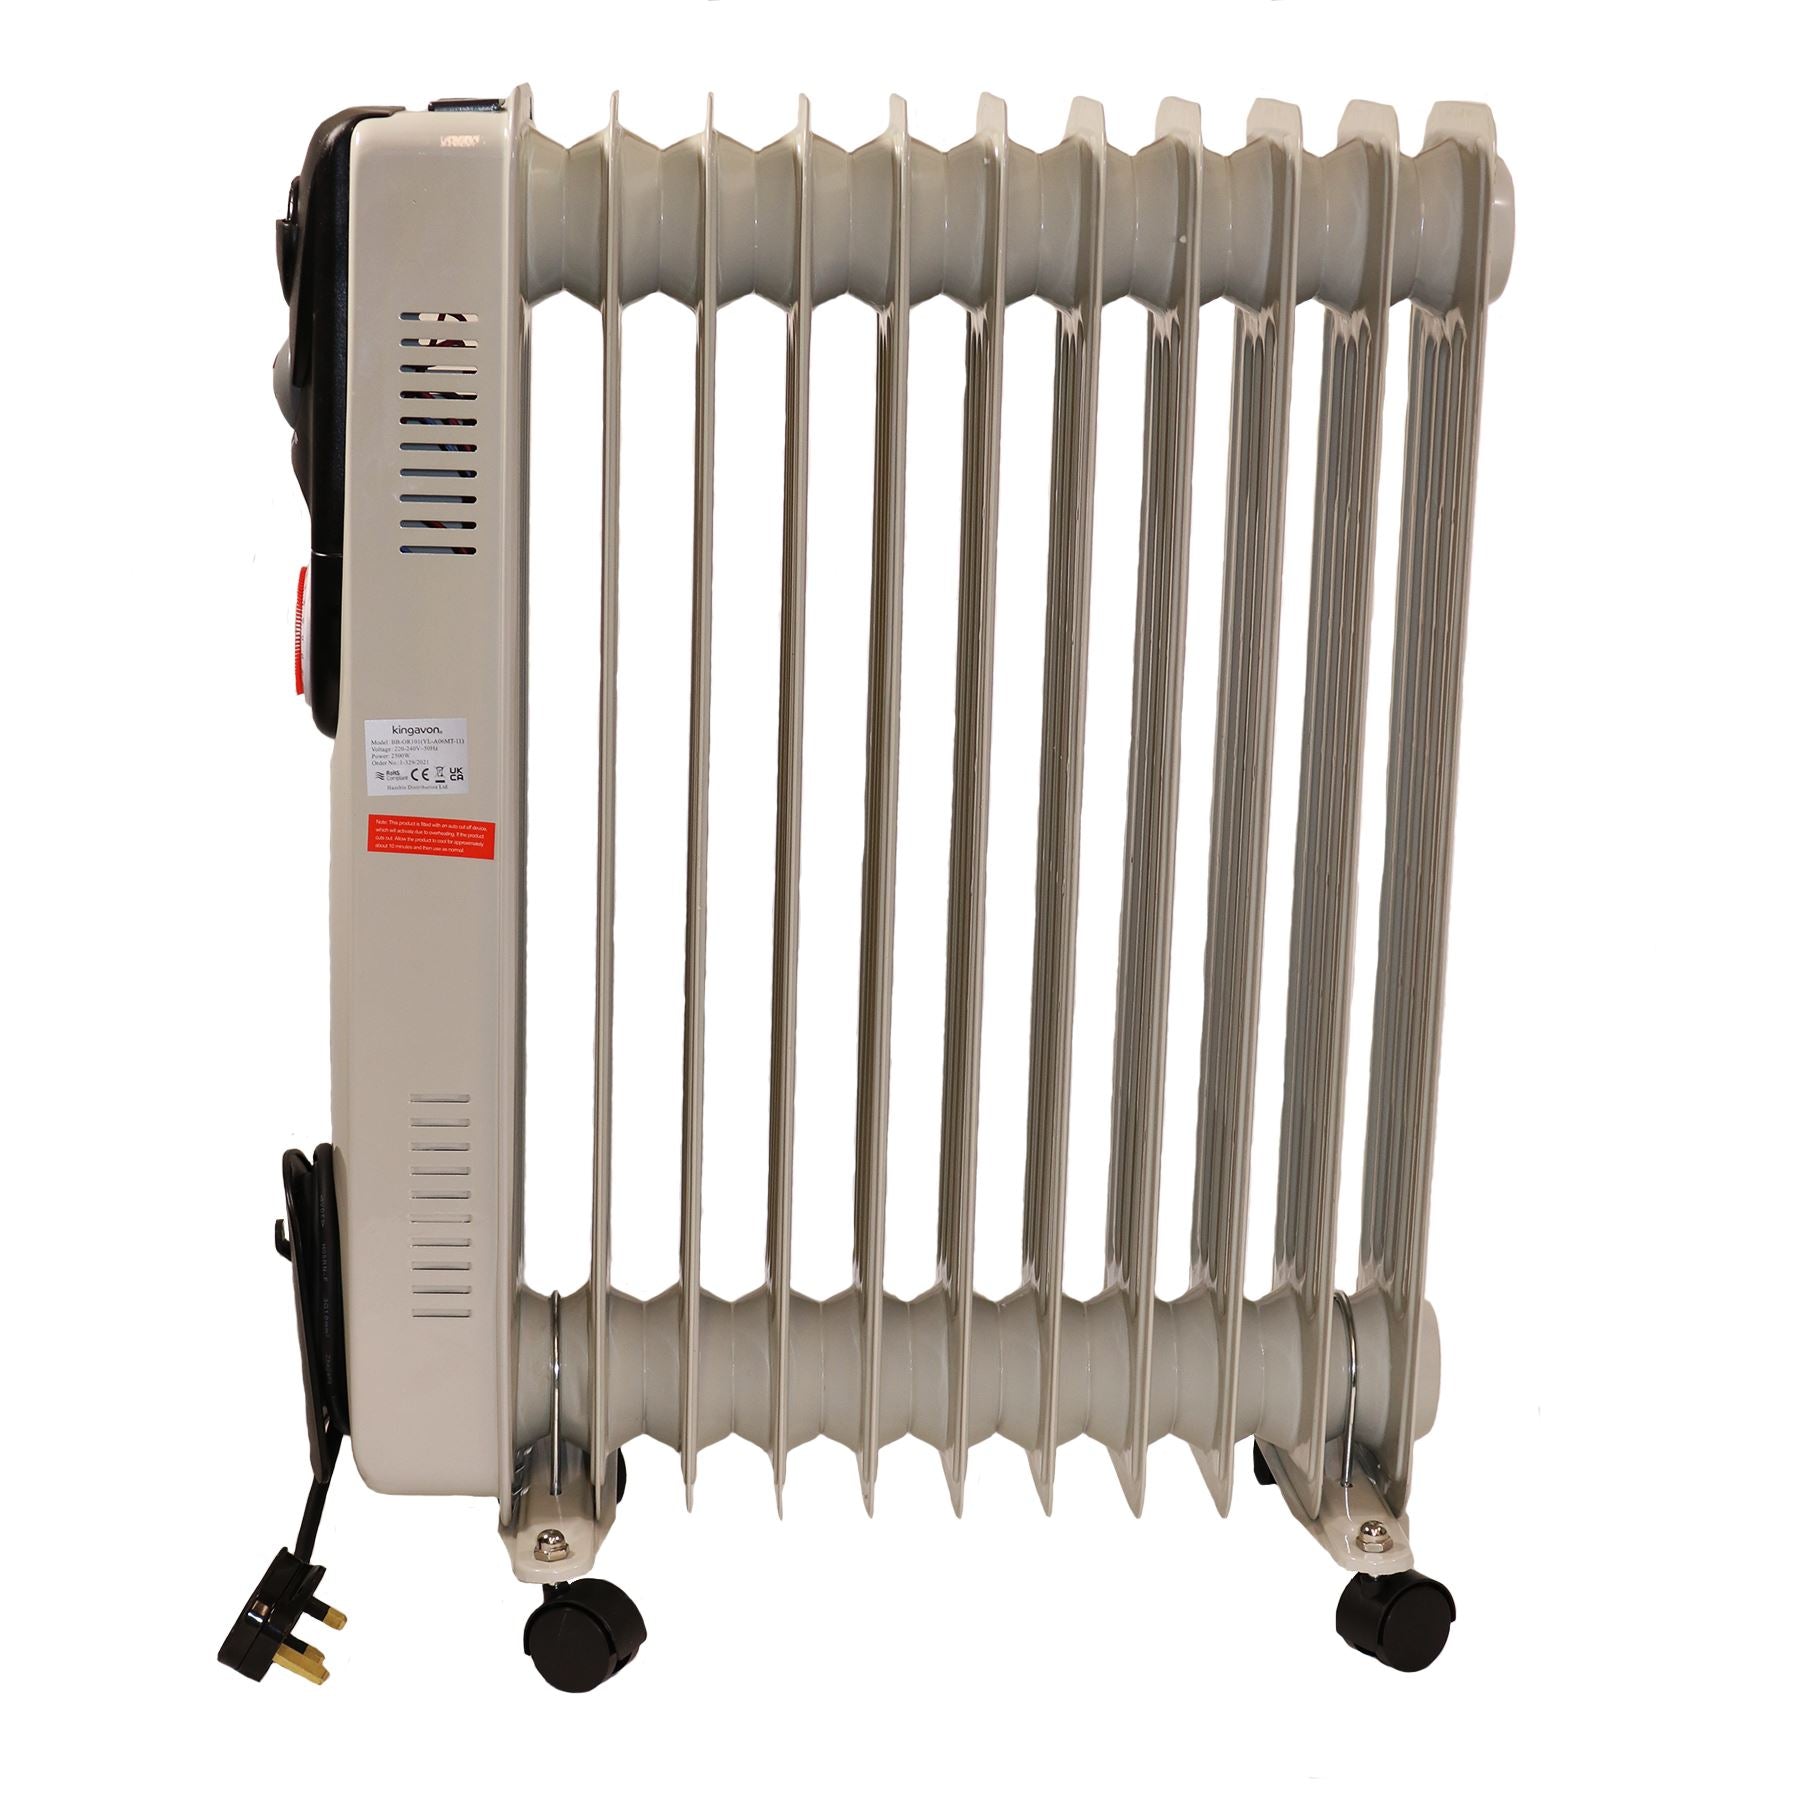 2.5KW 11 Fin Oil Filled Portable Electric Radiator Heater Adj Thermostat + Timer